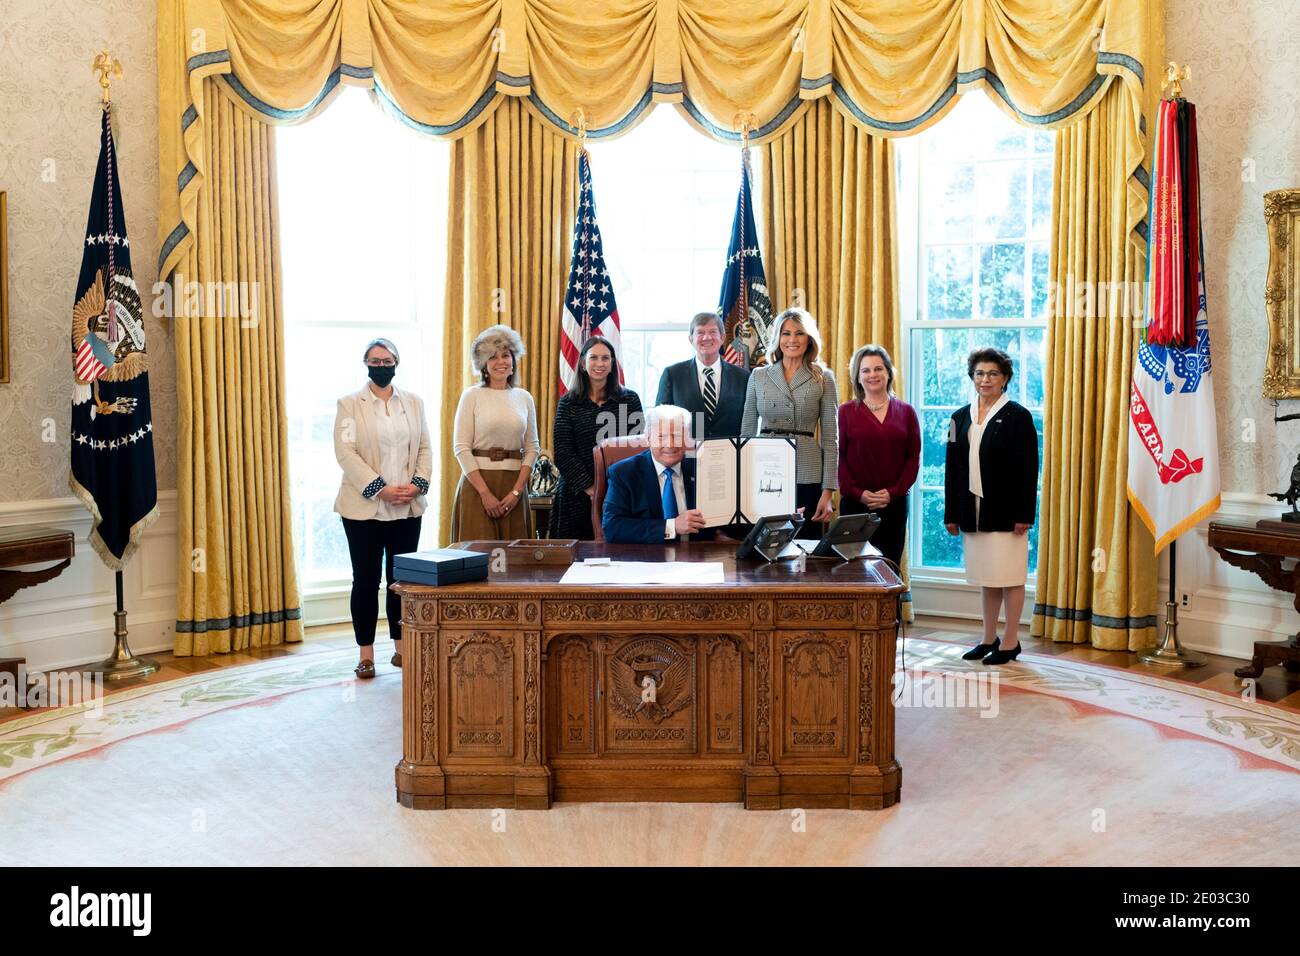 Washington, United States Of America. 17th Dec, 2020. U.S President Donald Trump, joined by First Lady Melania Trump and guests, signs H.R. 473 to Authorize the Every Word We Utter Monument for the District of Columbia in the Oval Office of the White House December 17, 2020 in Washington, DC Credit: Planetpix/Alamy Live News Stock Photo